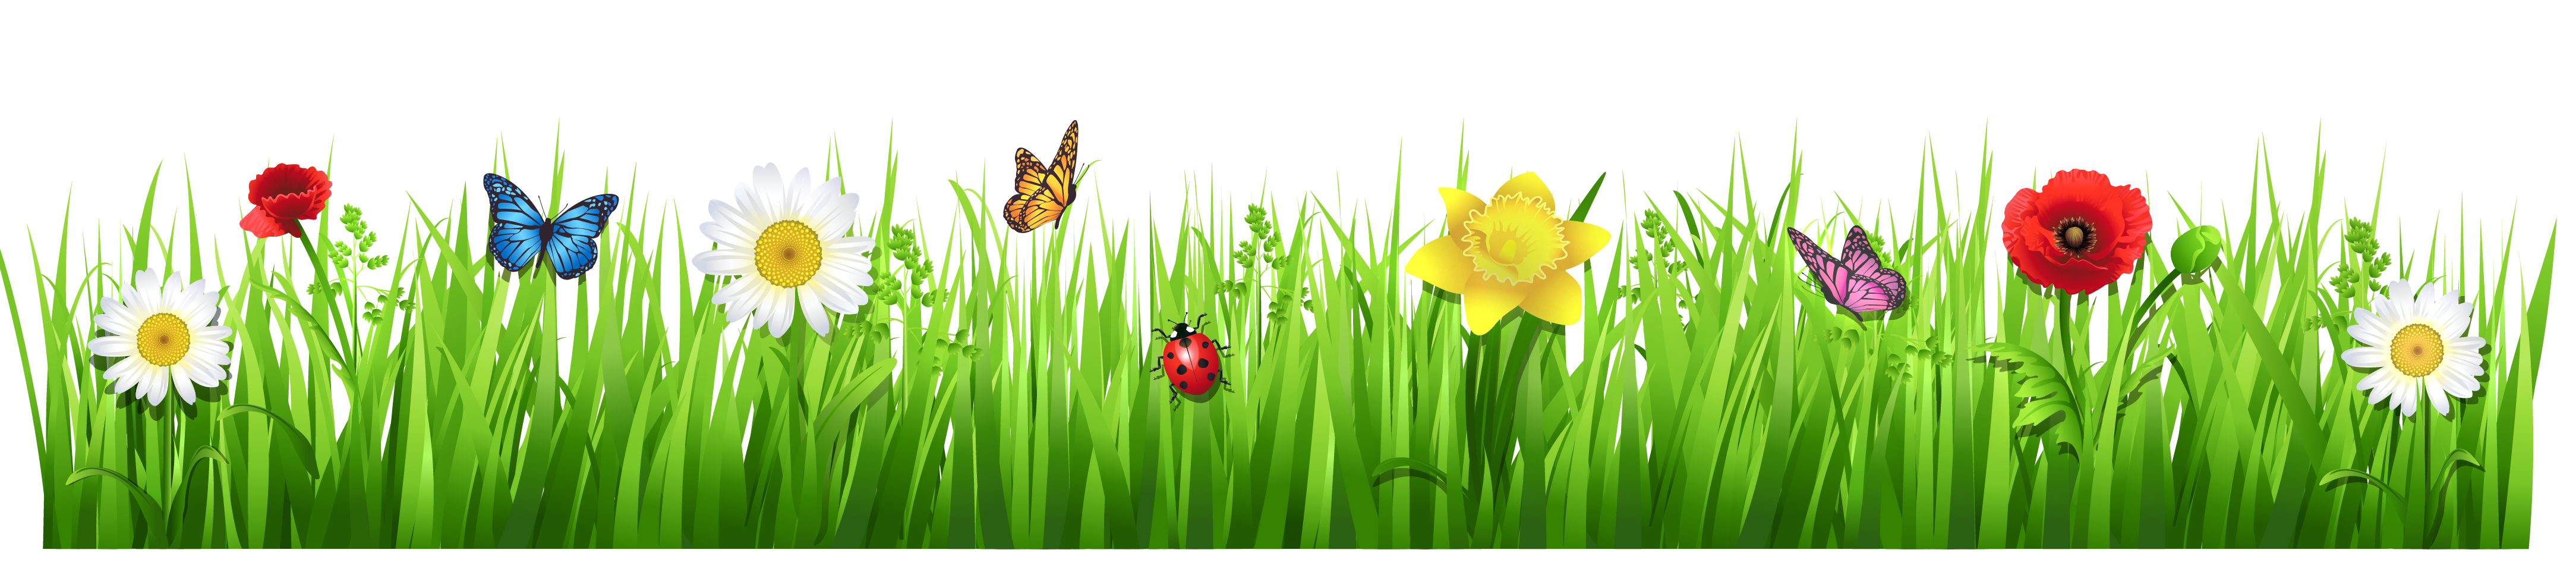 Clipart spring flowers free -